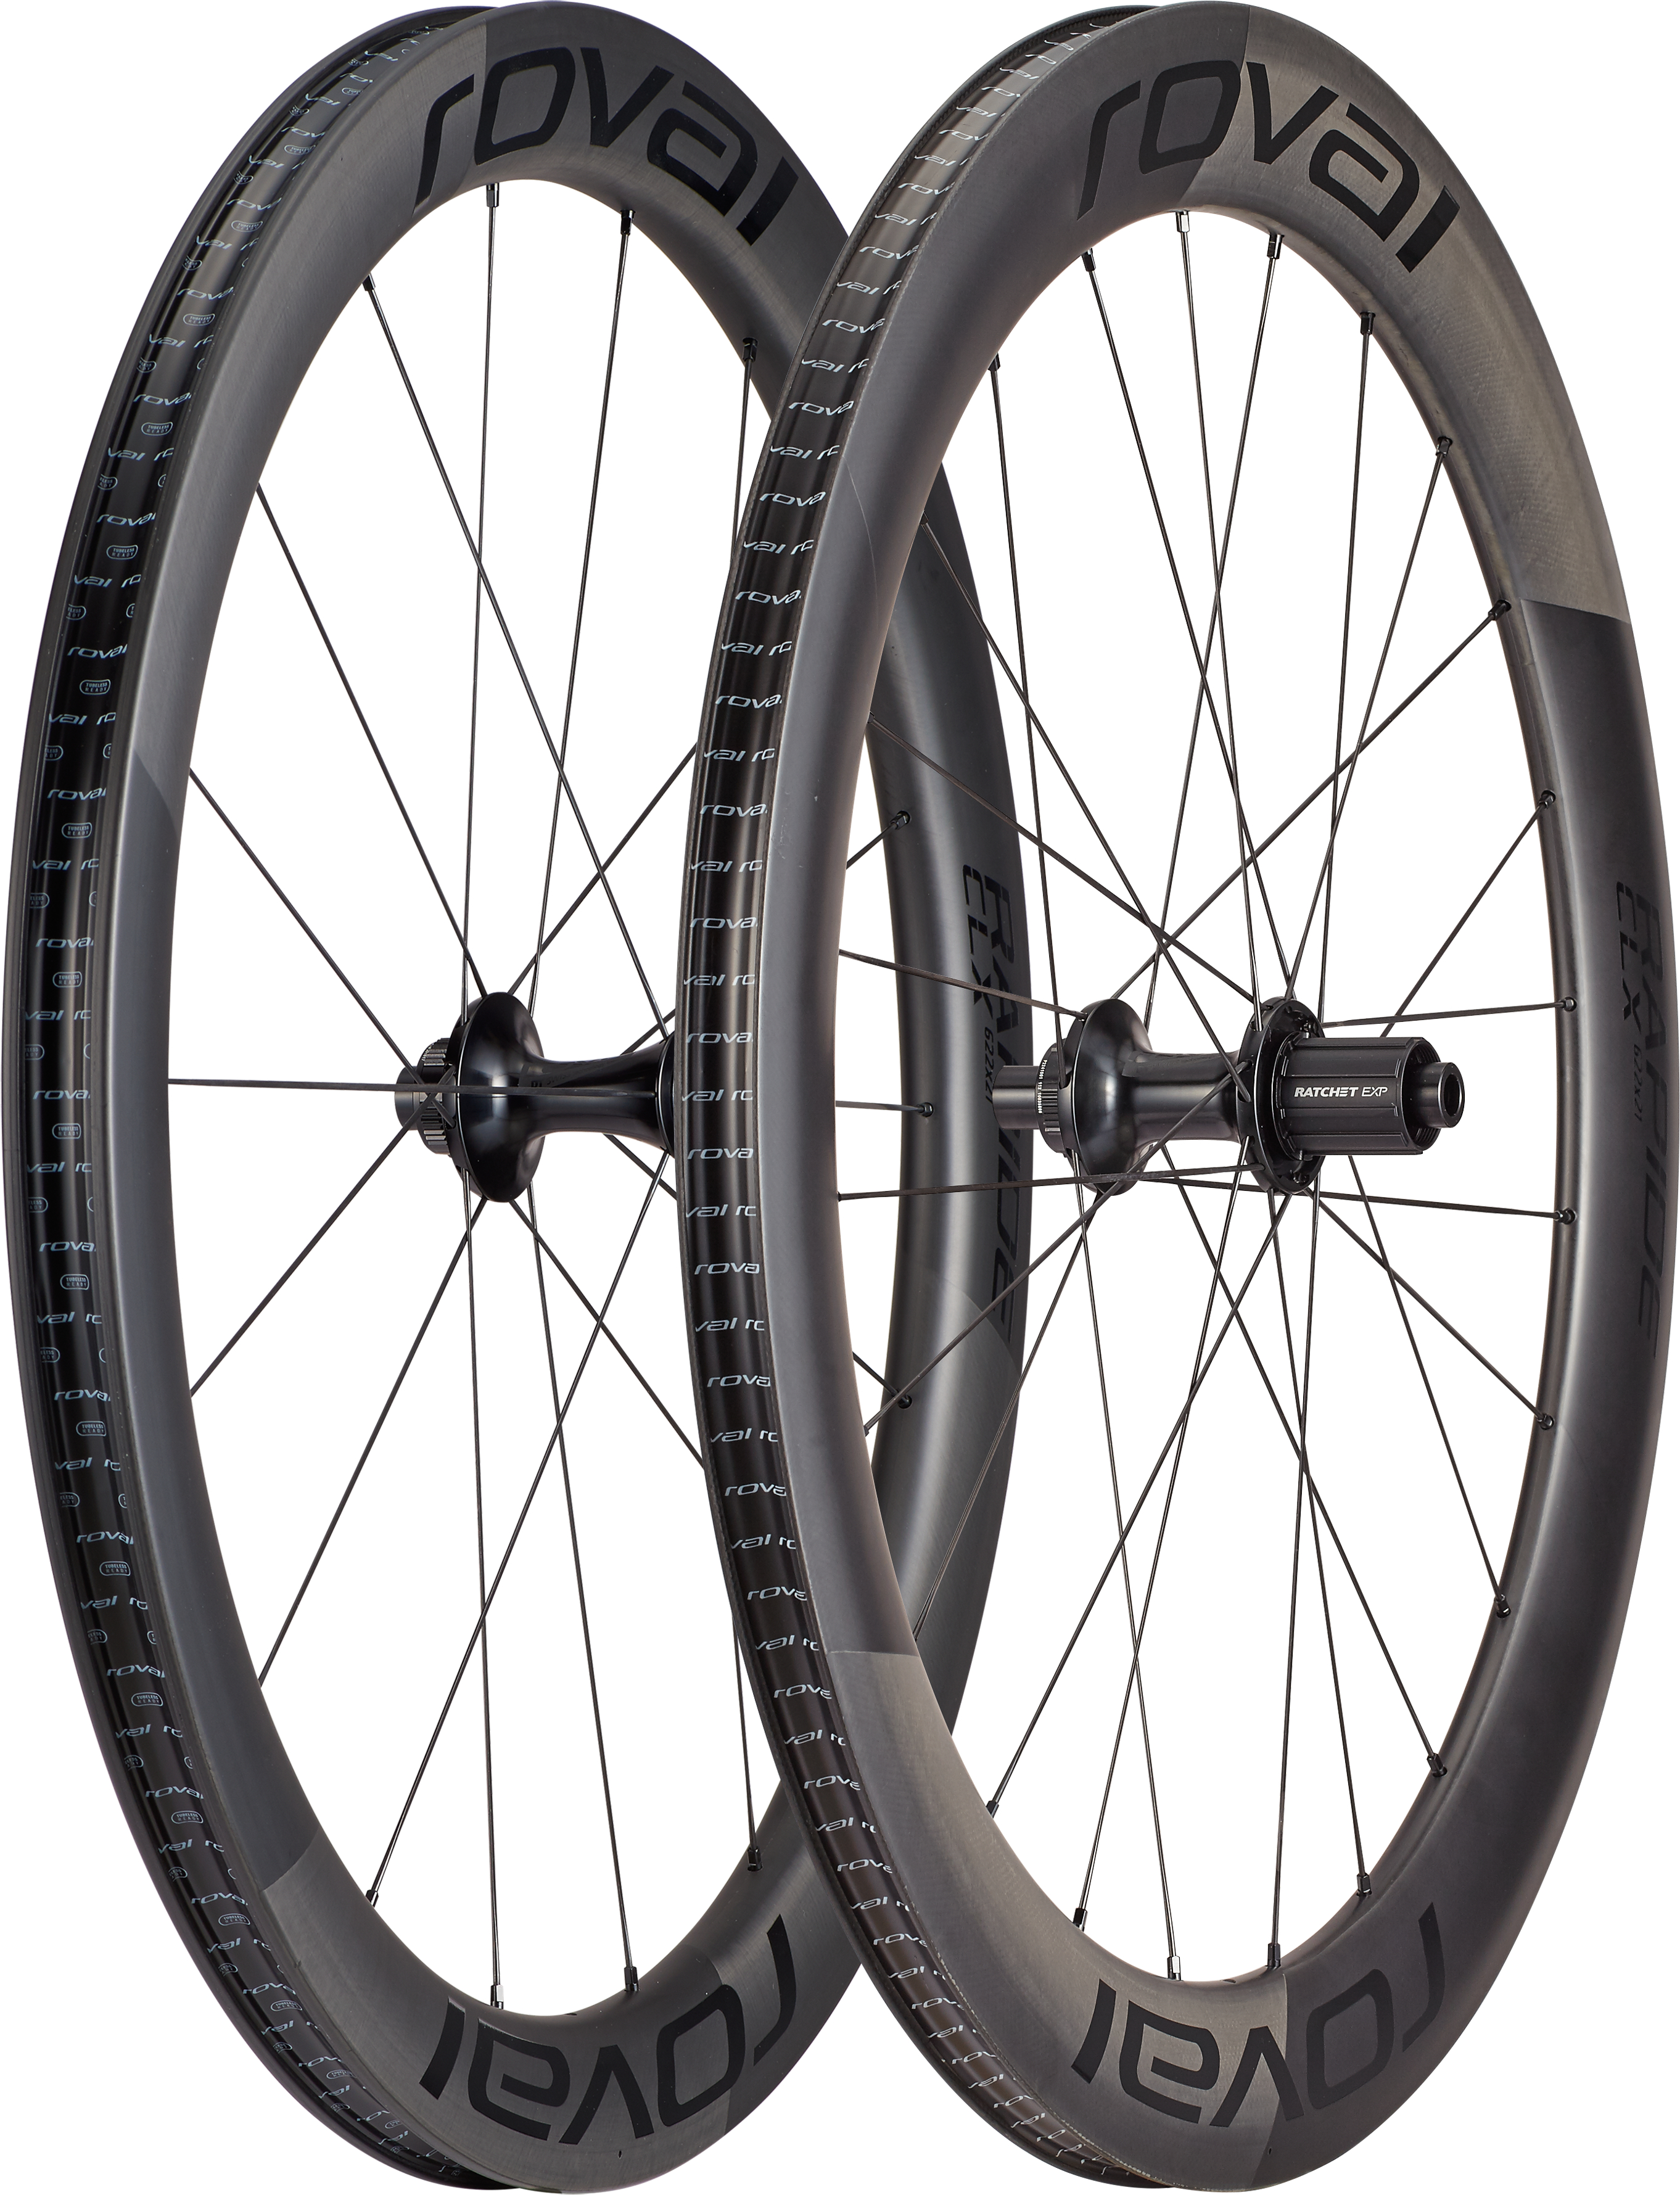 Cycles UK Specialized  Roval Rapide CLX II Wheelset 700C Front Satin Carbon/Gloss Black